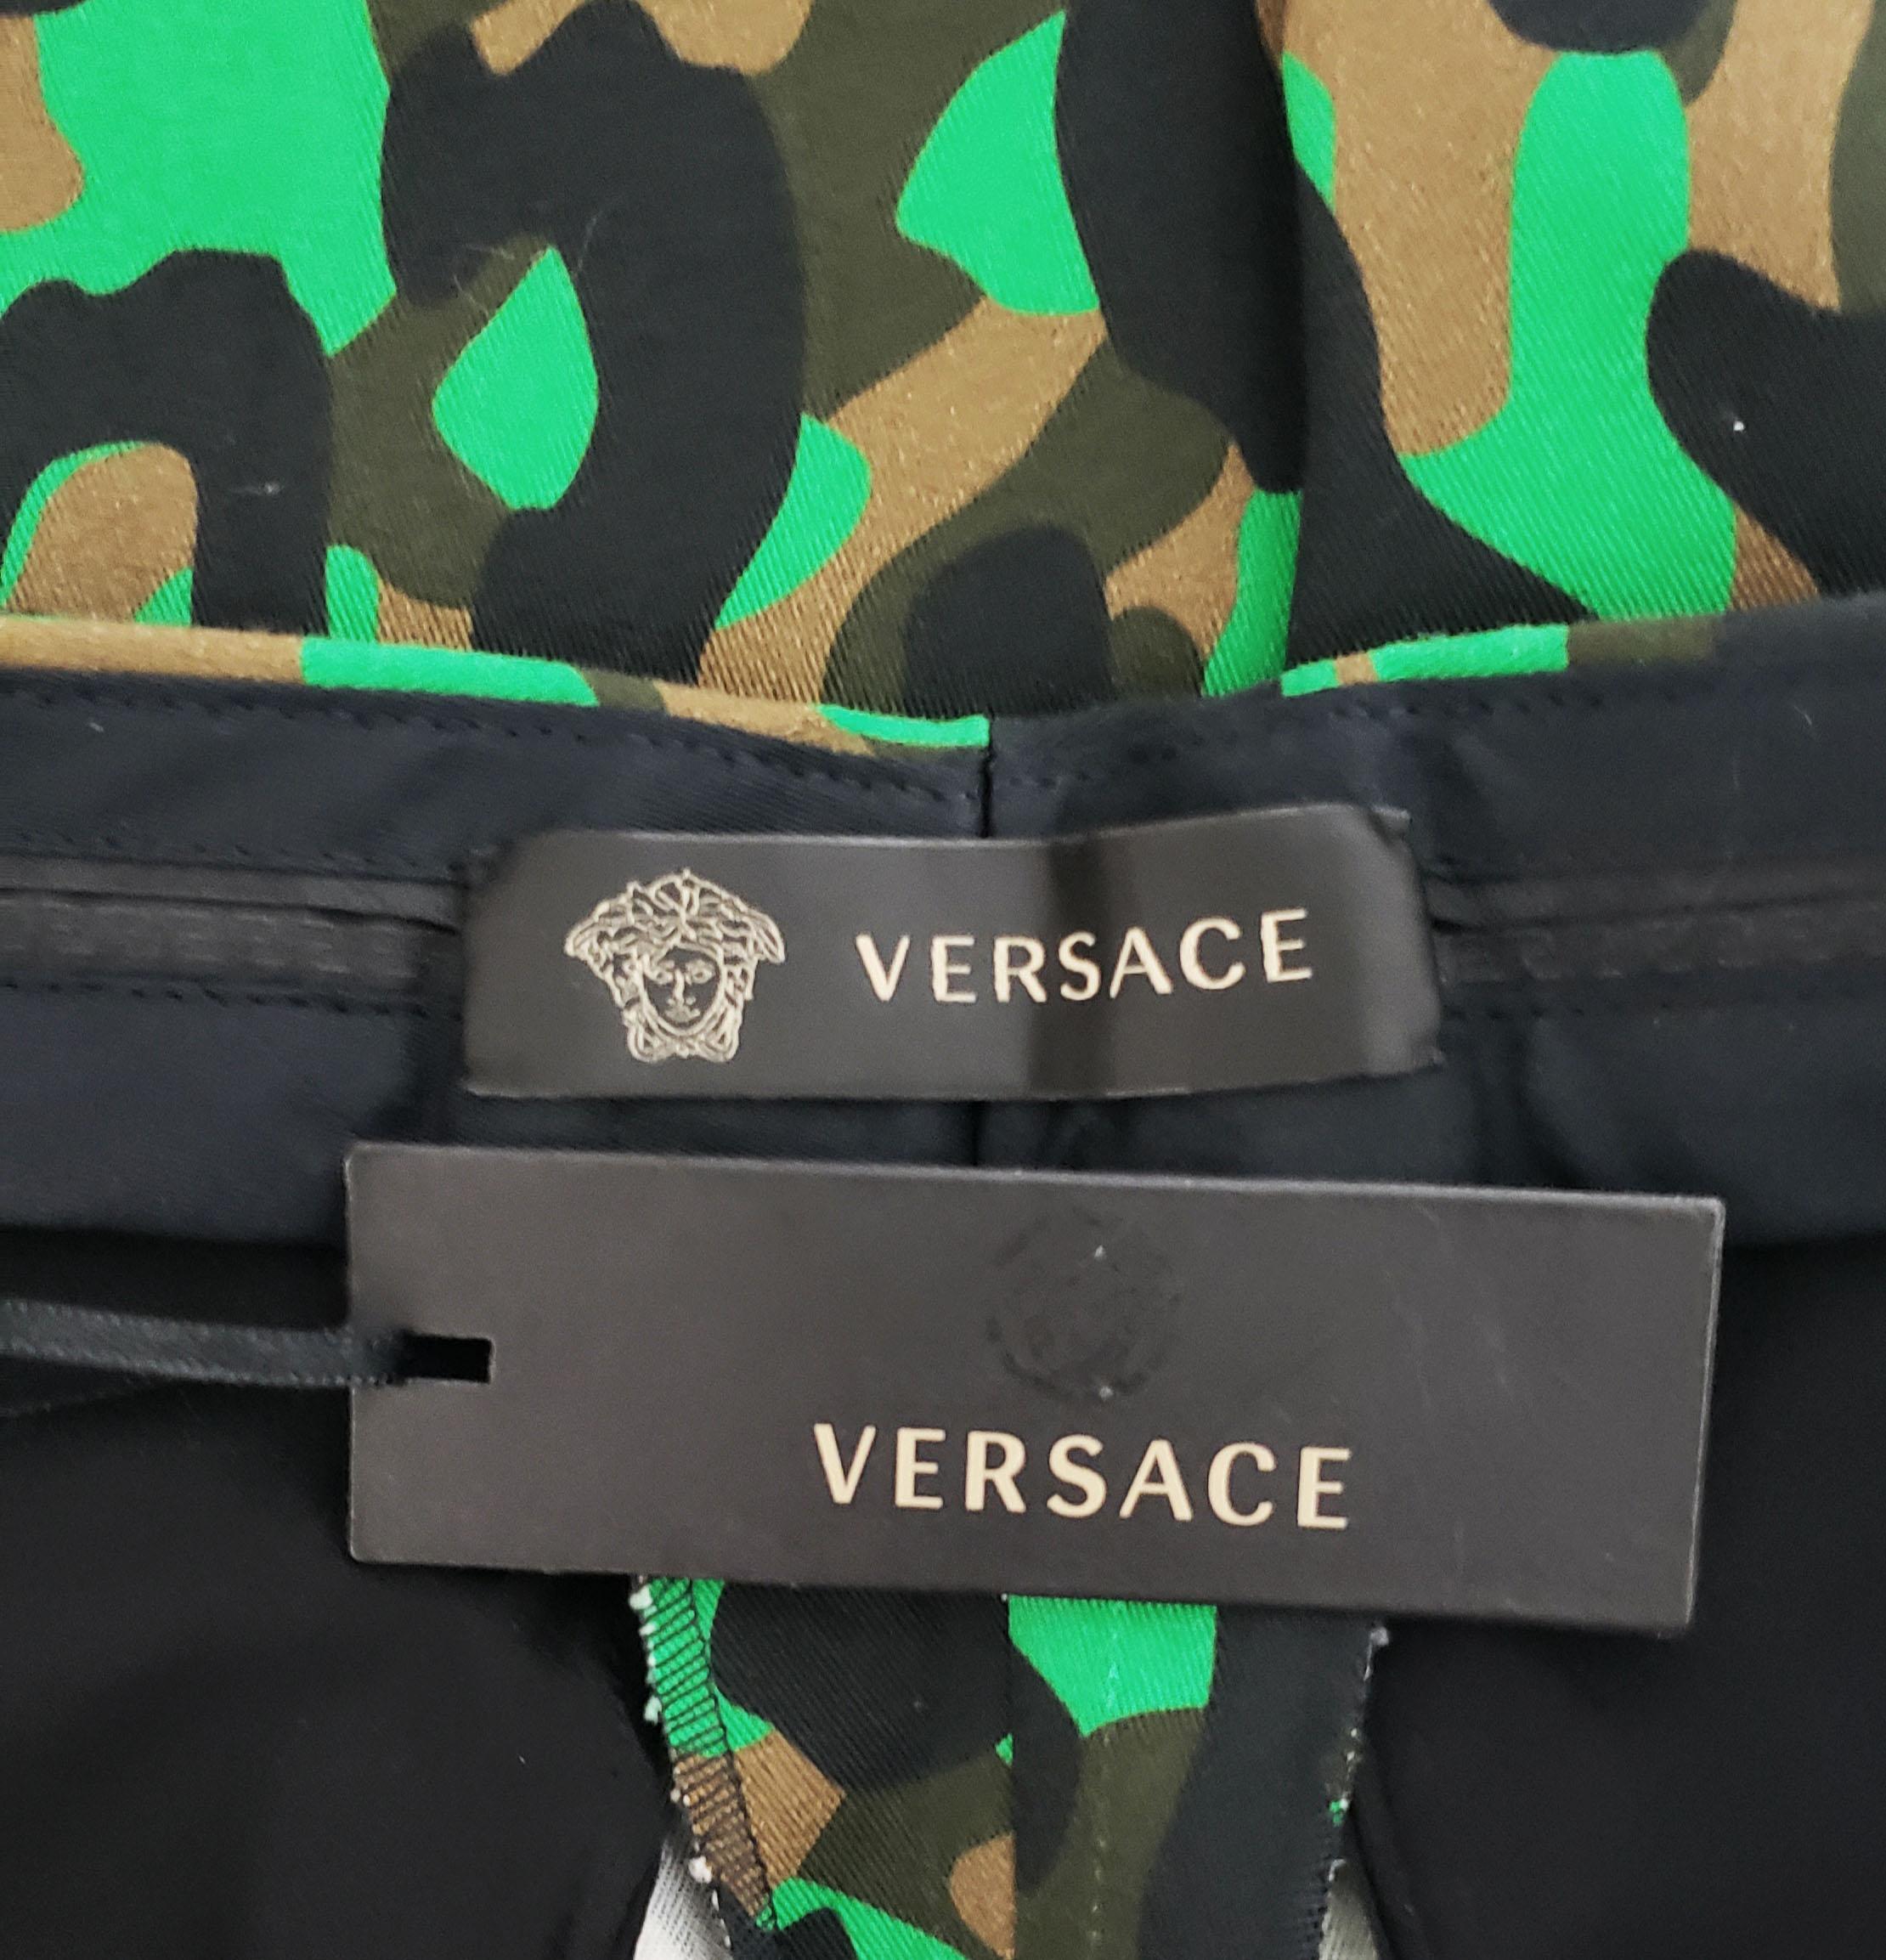 S/S 2016 Look # 13 VERSACE MILITARY CAMOUFLAGE PRINTED PANTS size 38 - 2 For Sale 1